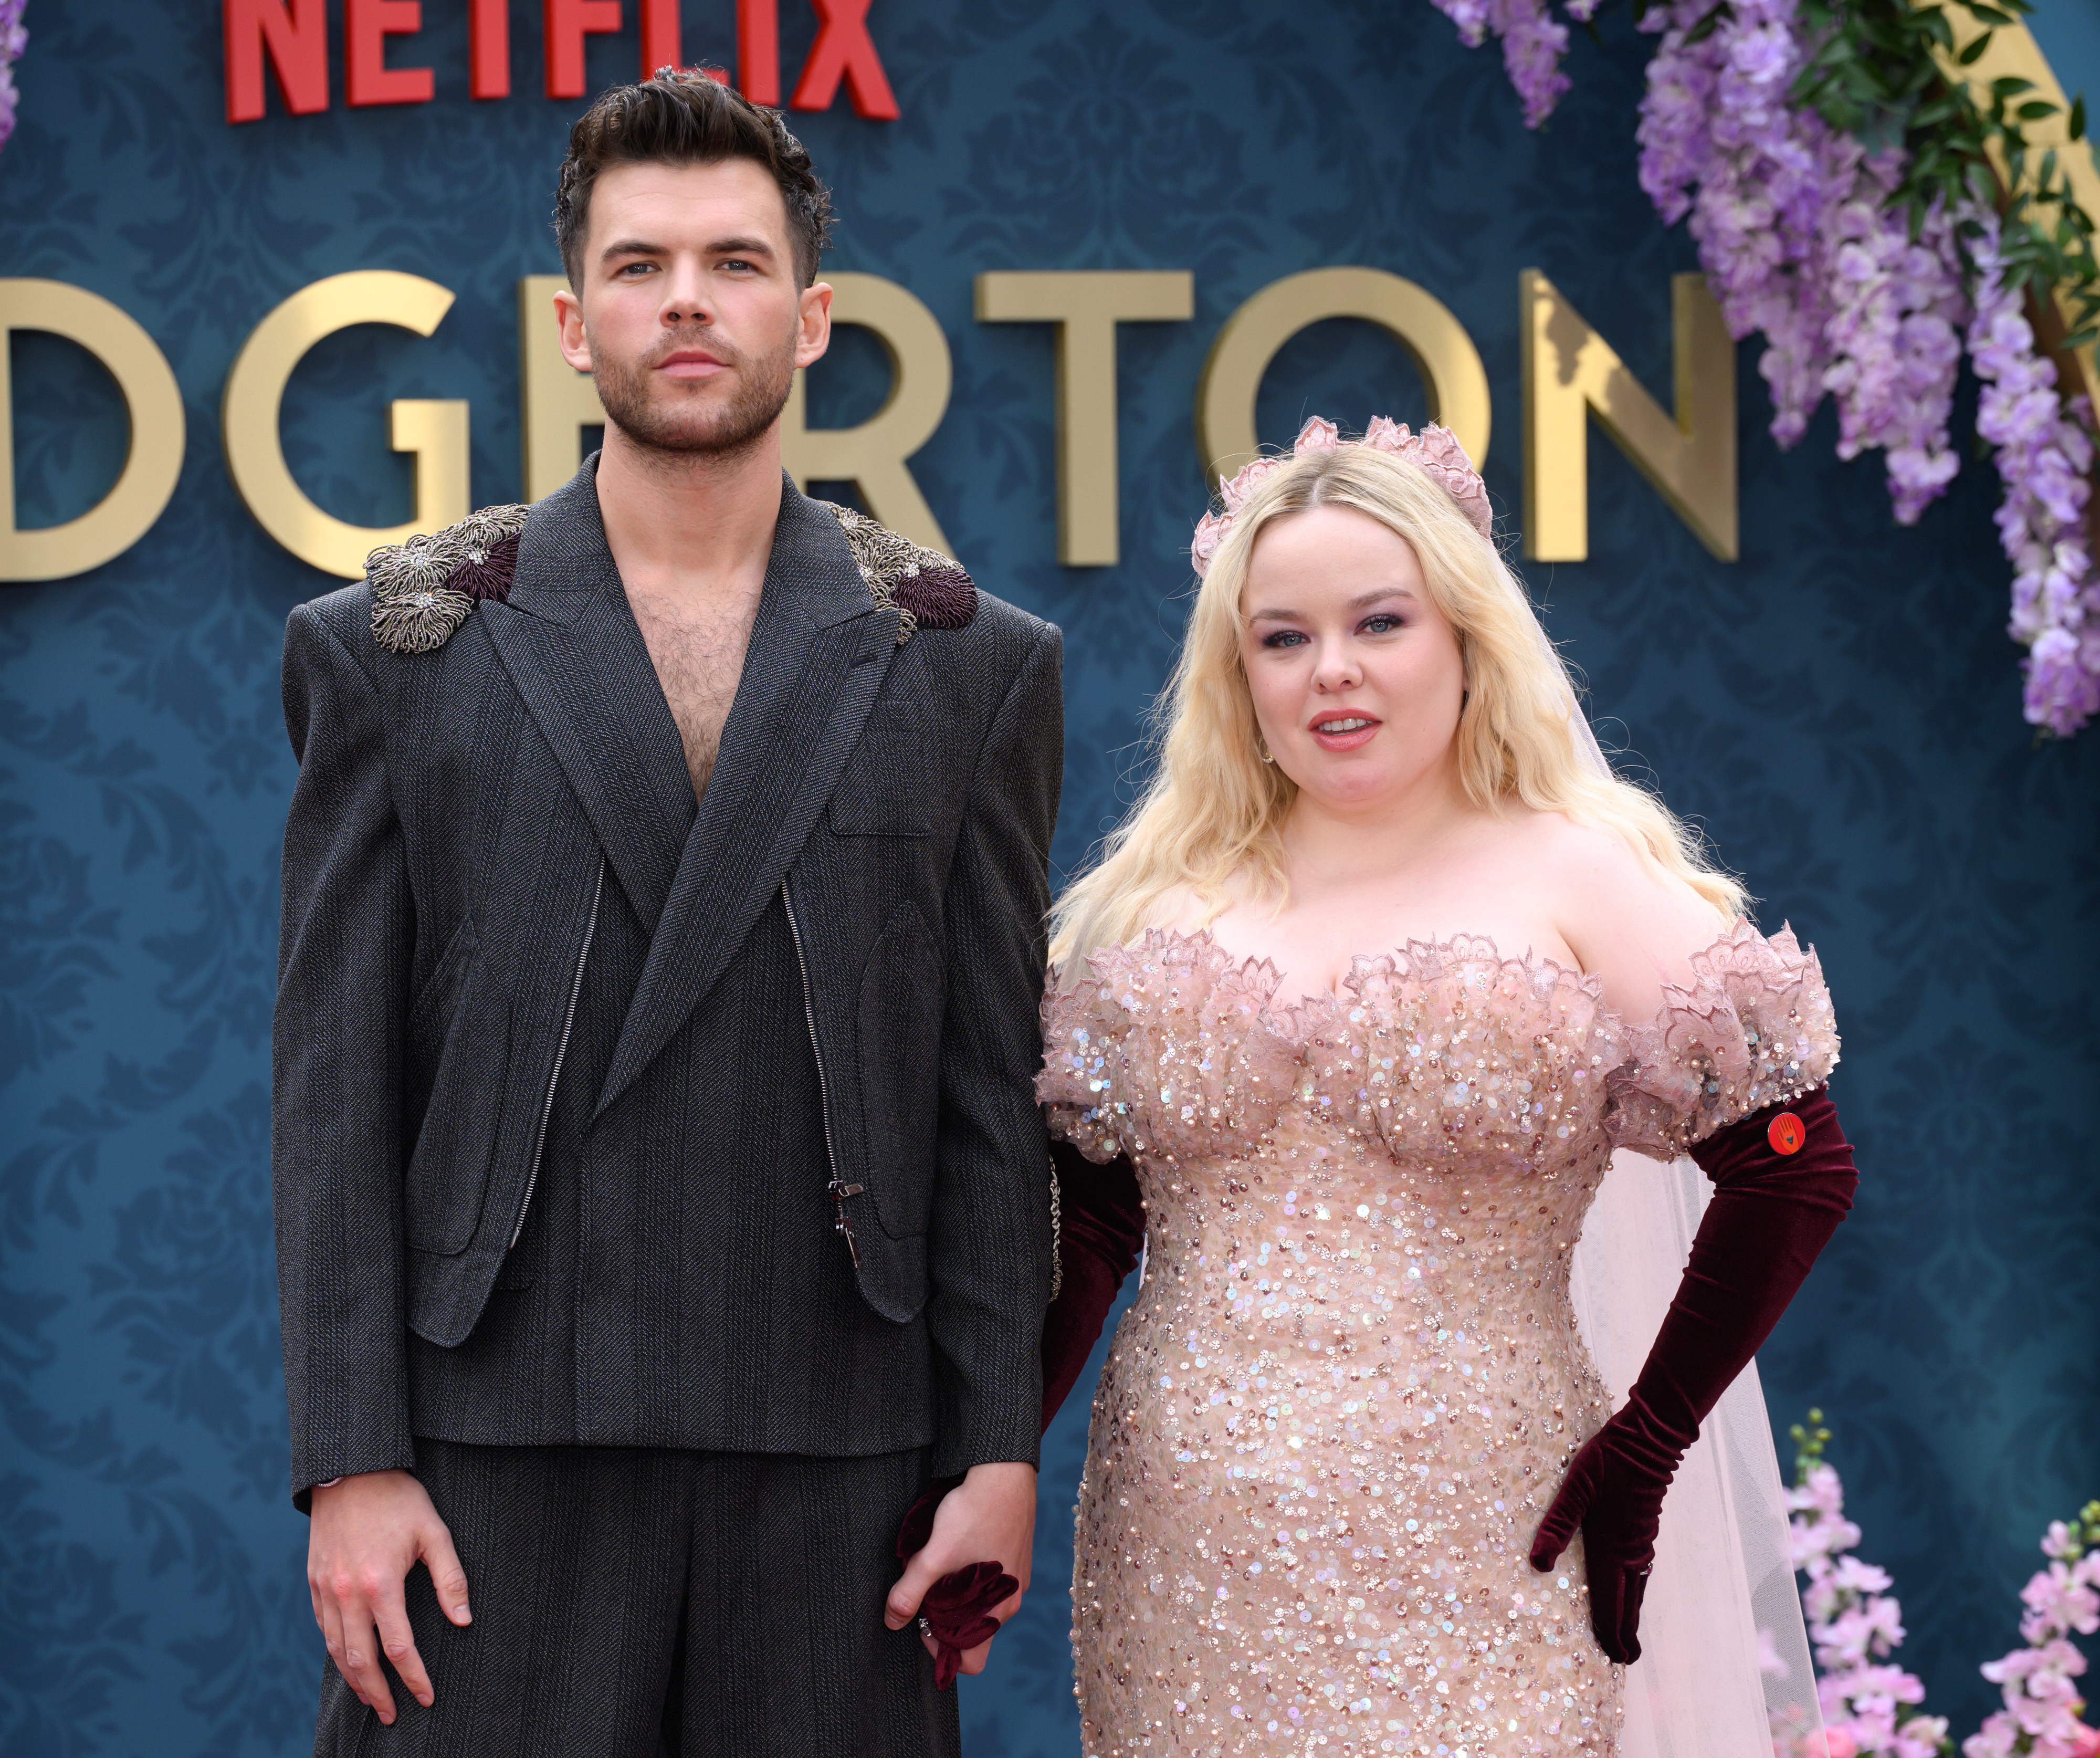 Luke Newton and Nicola Coughlan attend a Bridgerton event. Luke is in a stylish dark suit, and Nicola wears a sparkling off-the-shoulder dress with velvet gloves